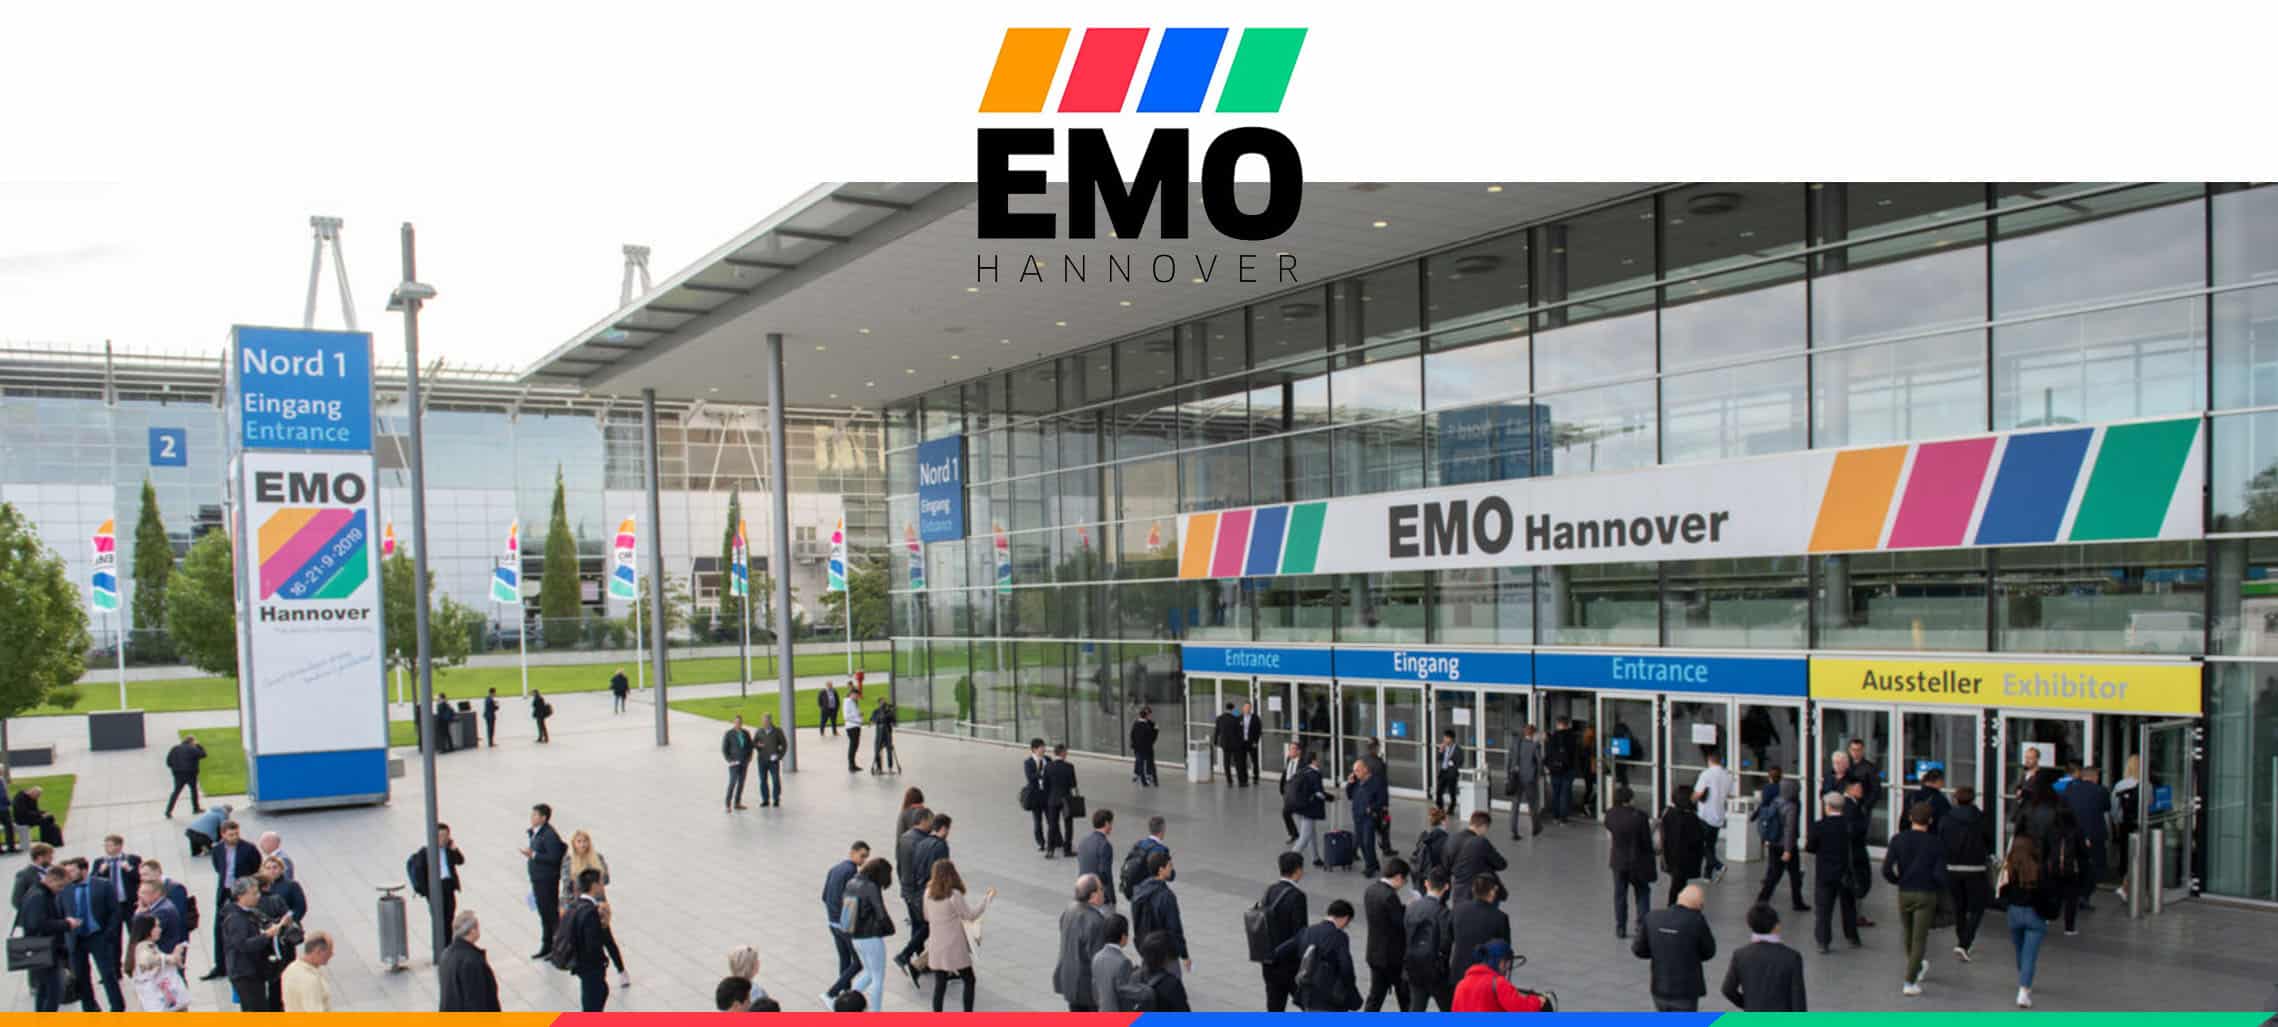 Entrance to EMO Hannover